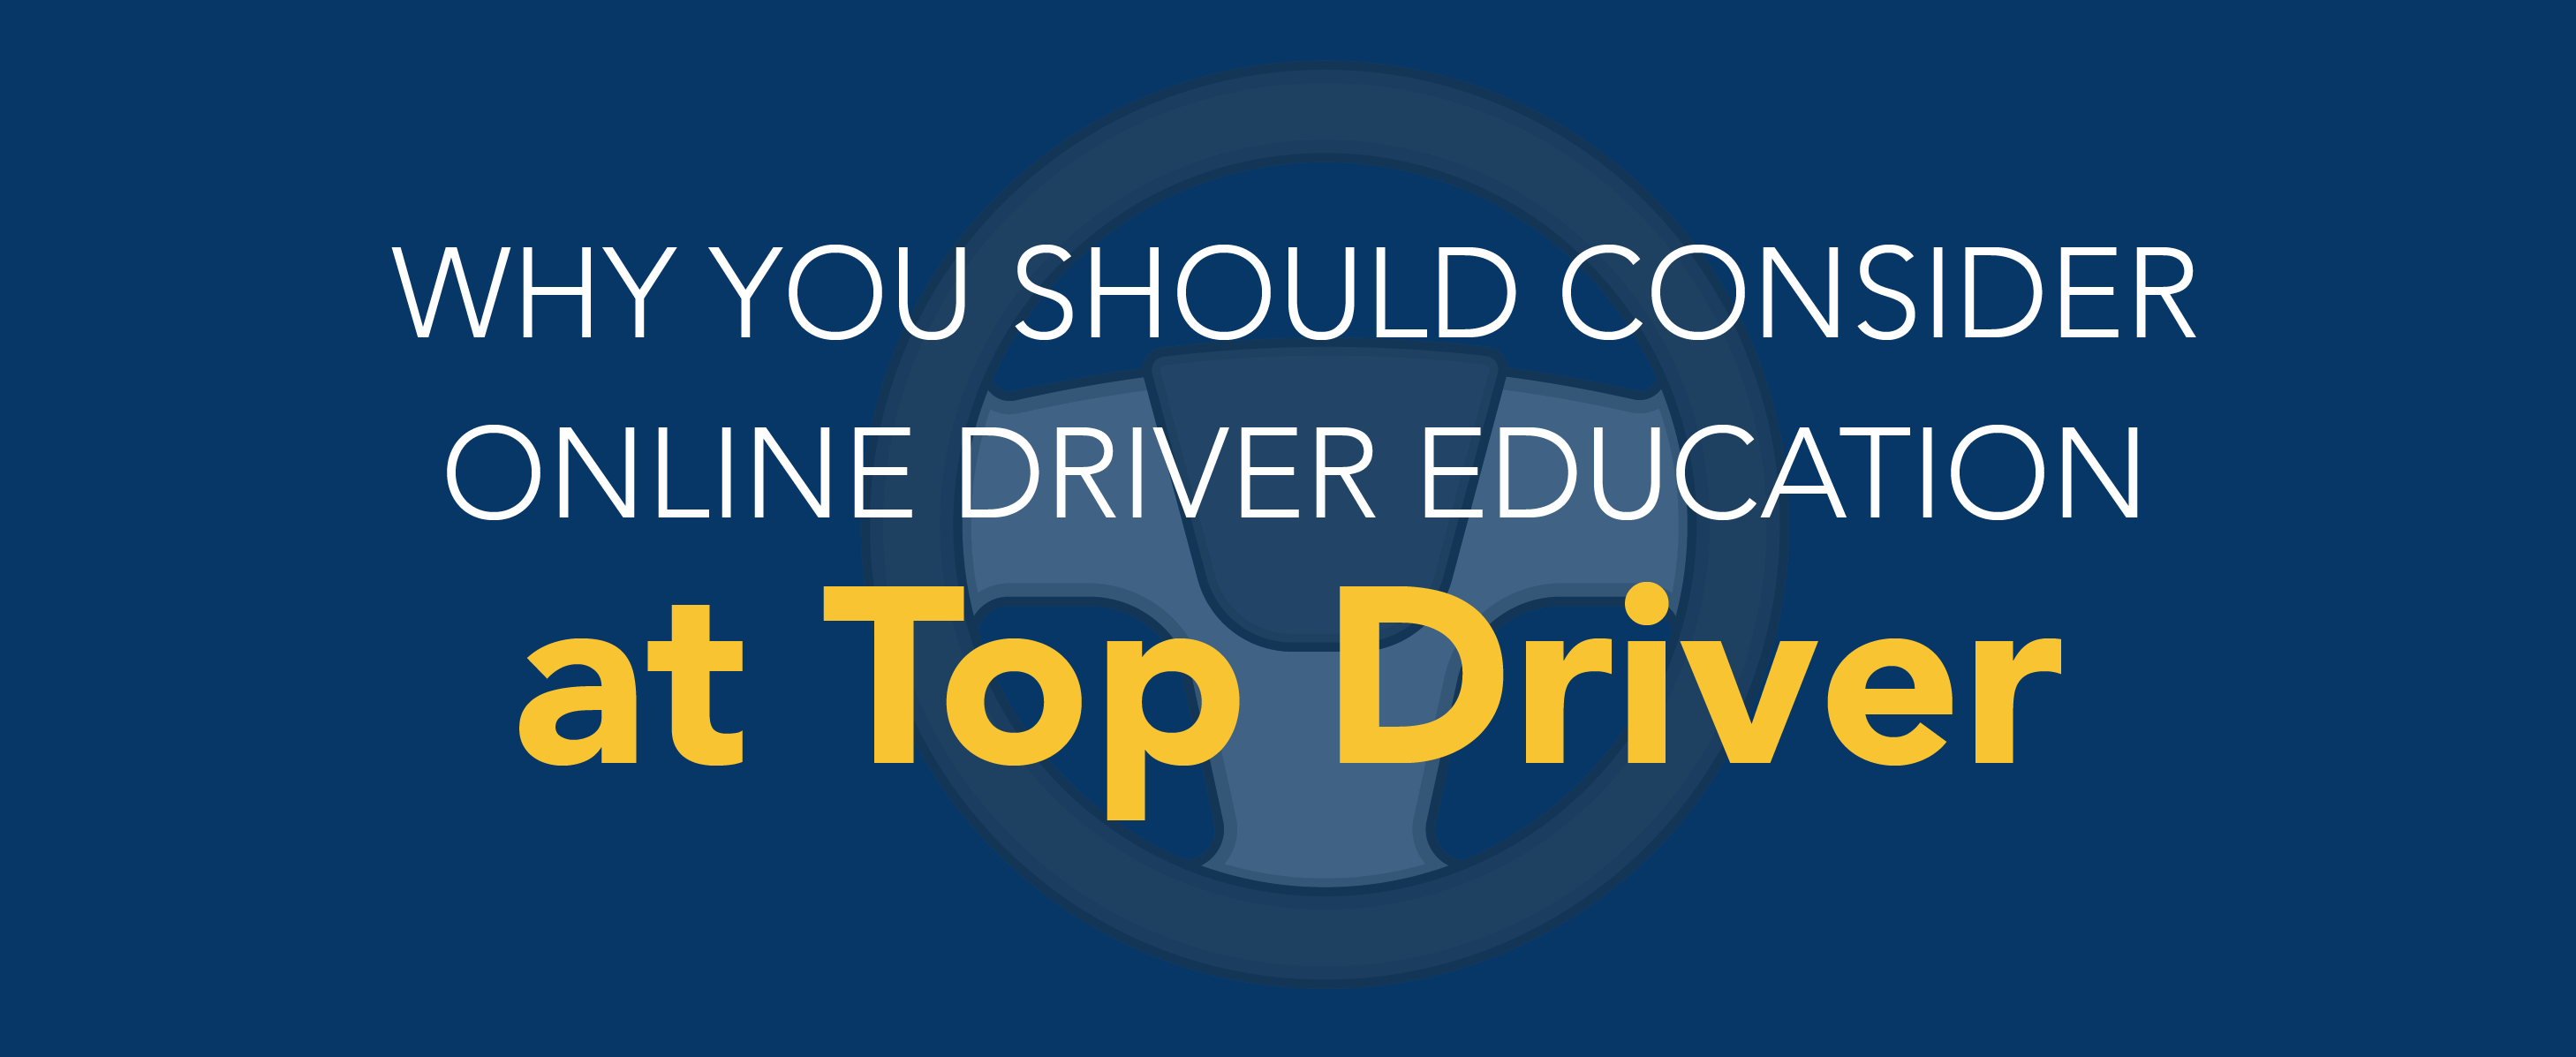 Why you should consider online driver education at Top Driver